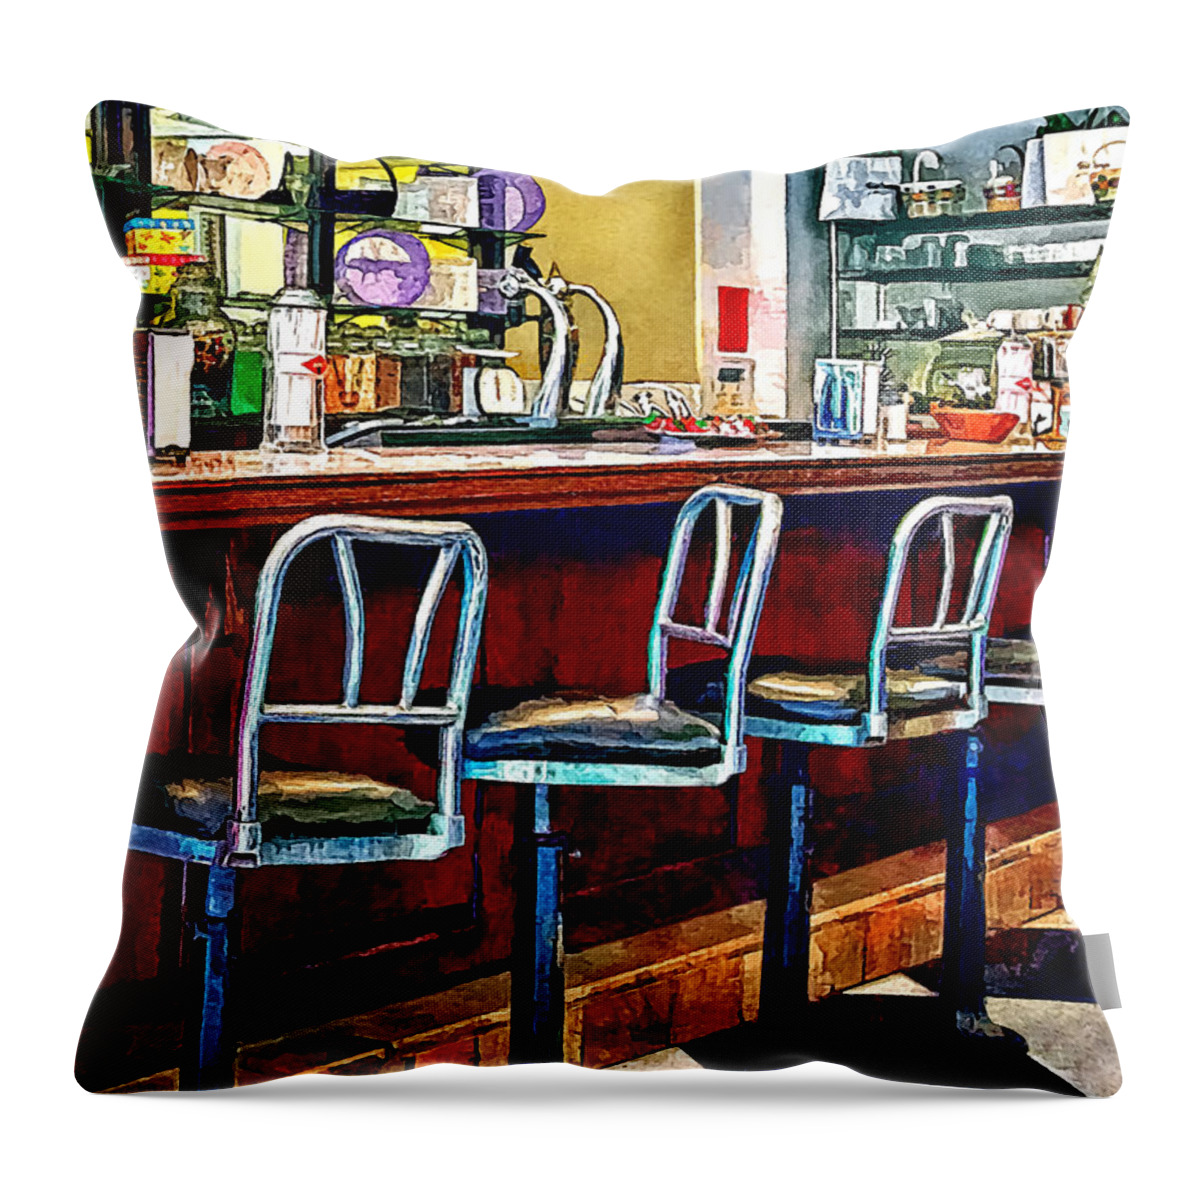 Candy Store Throw Pillow featuring the photograph Candy Store With Soda Fountain by Susan Savad